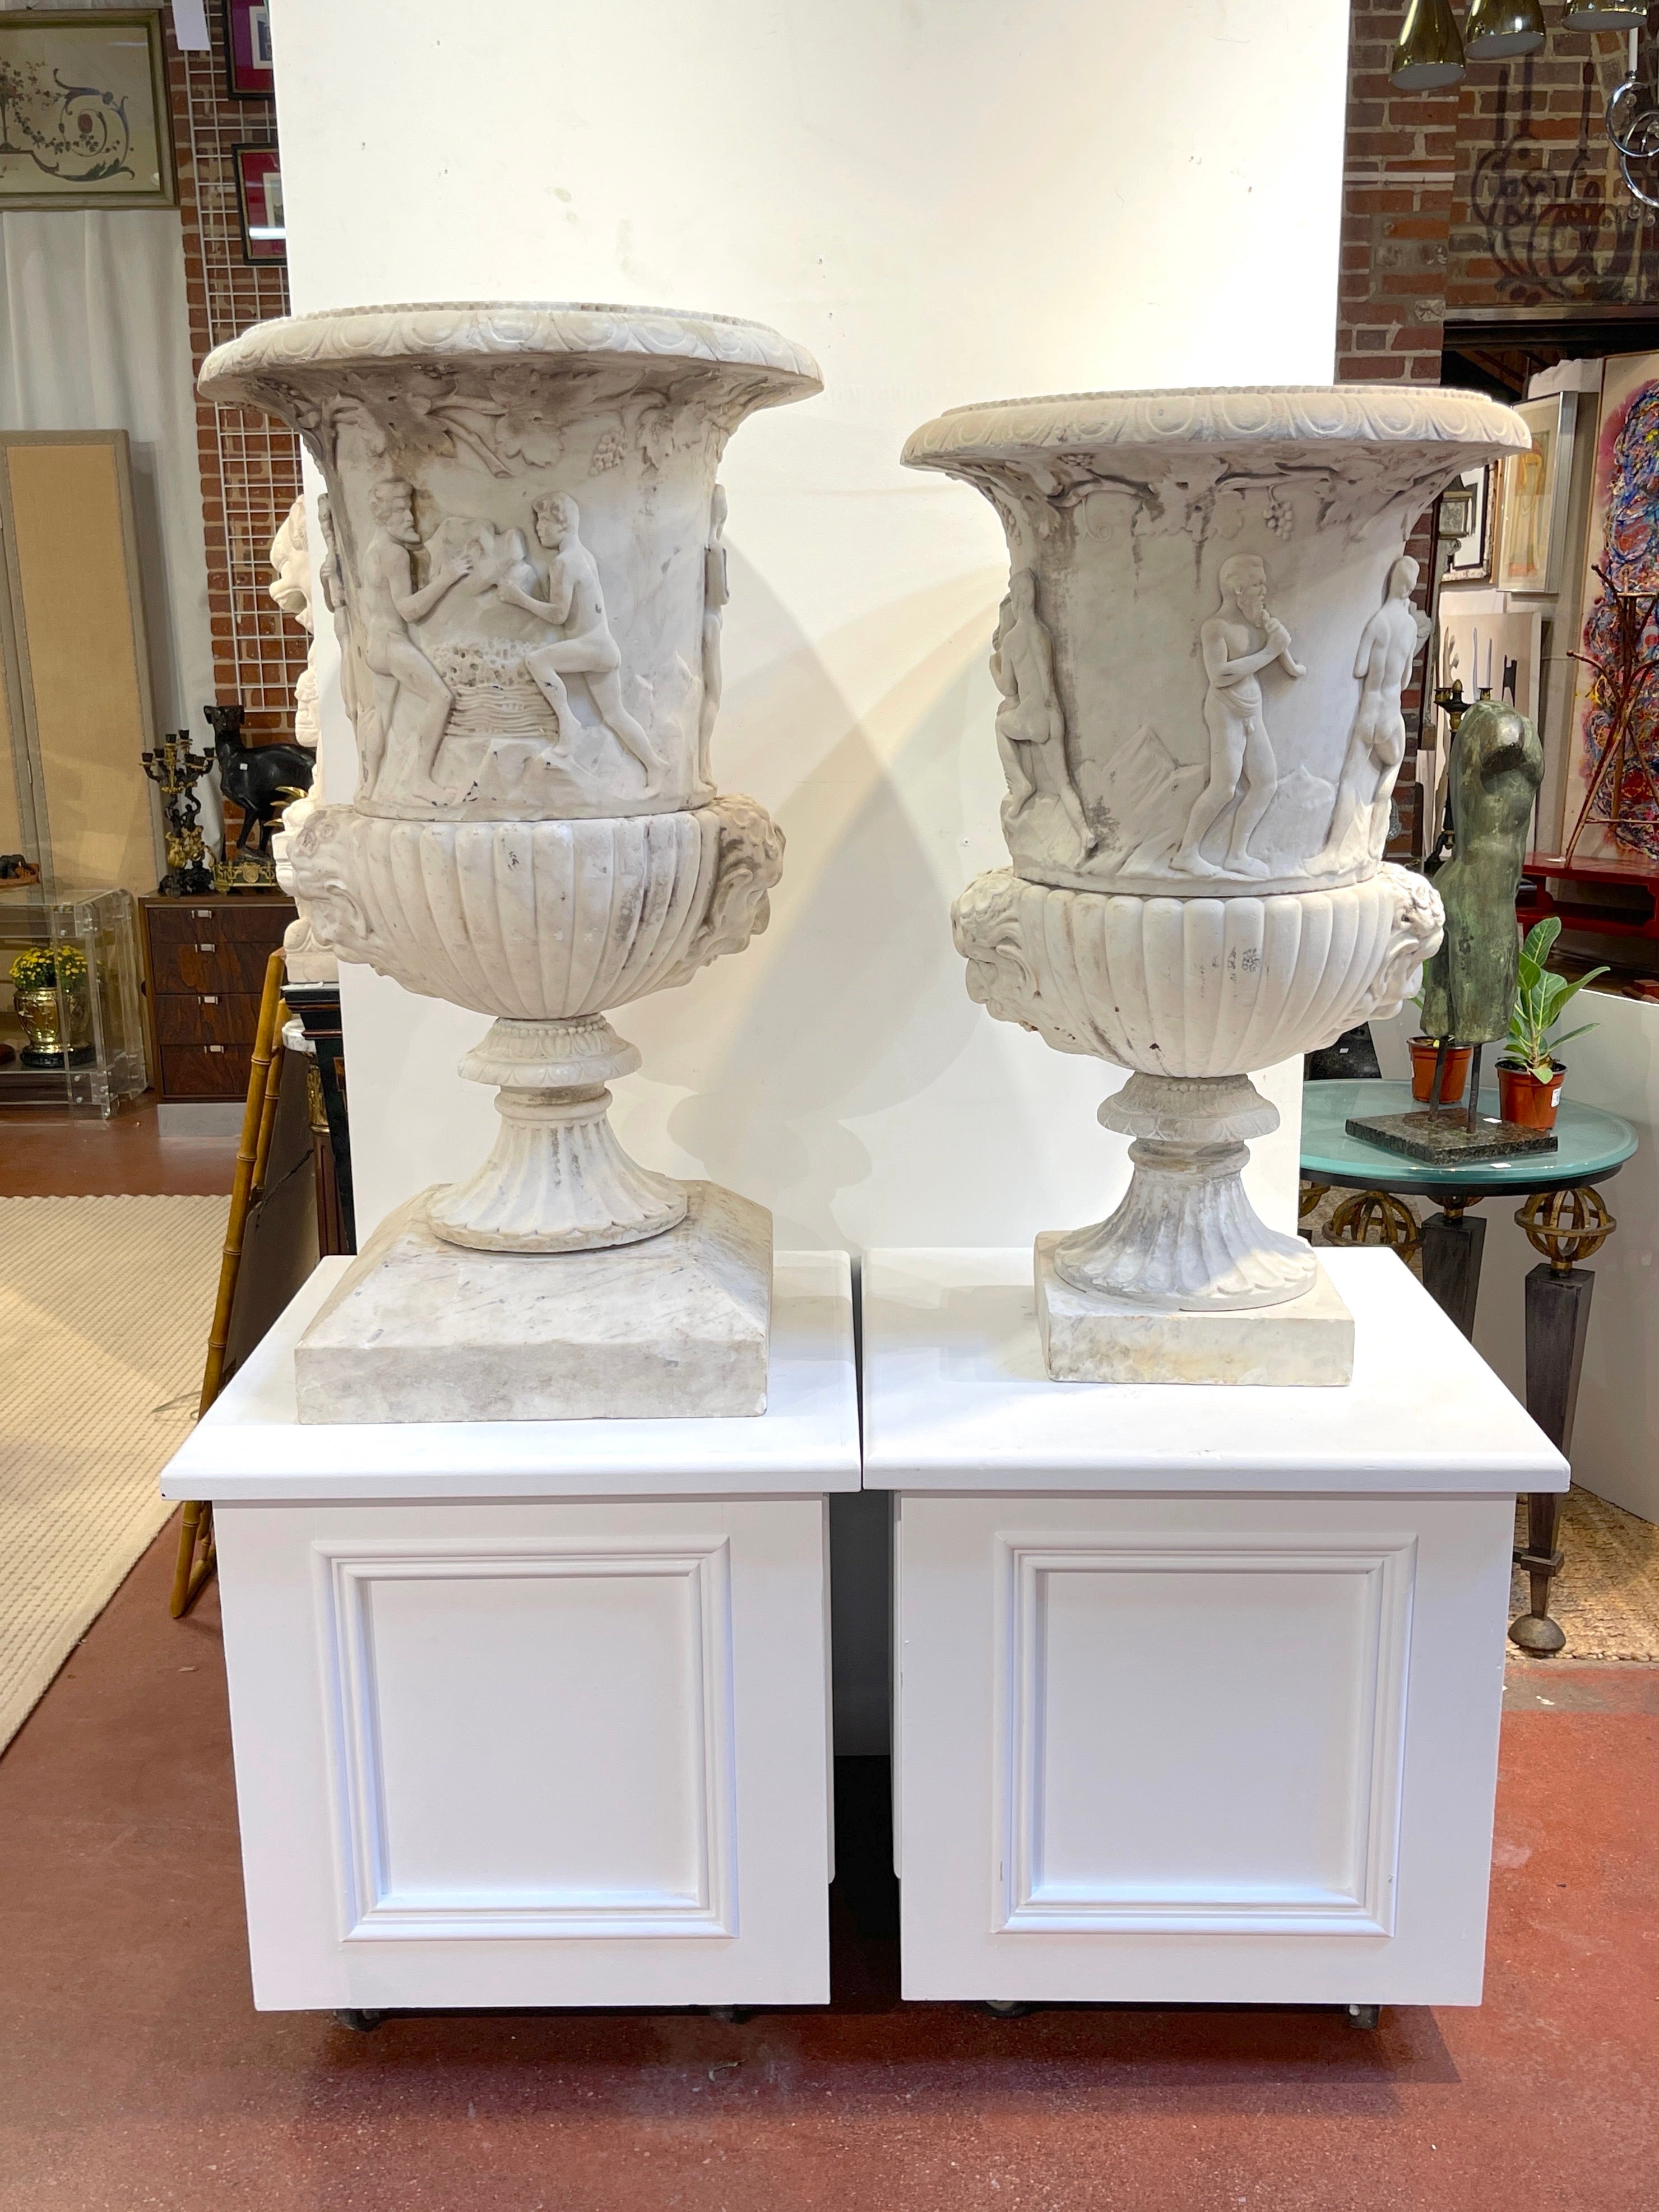 Pair of Antique Italian Marble Bacchanalian Garden Urns
19th Century or Older
After the Roman Antiquity, influences of the Medici and Borghese Vases

We are pleased to offer this remarkable pair of Antique (19th Century or Older) Italian Marble